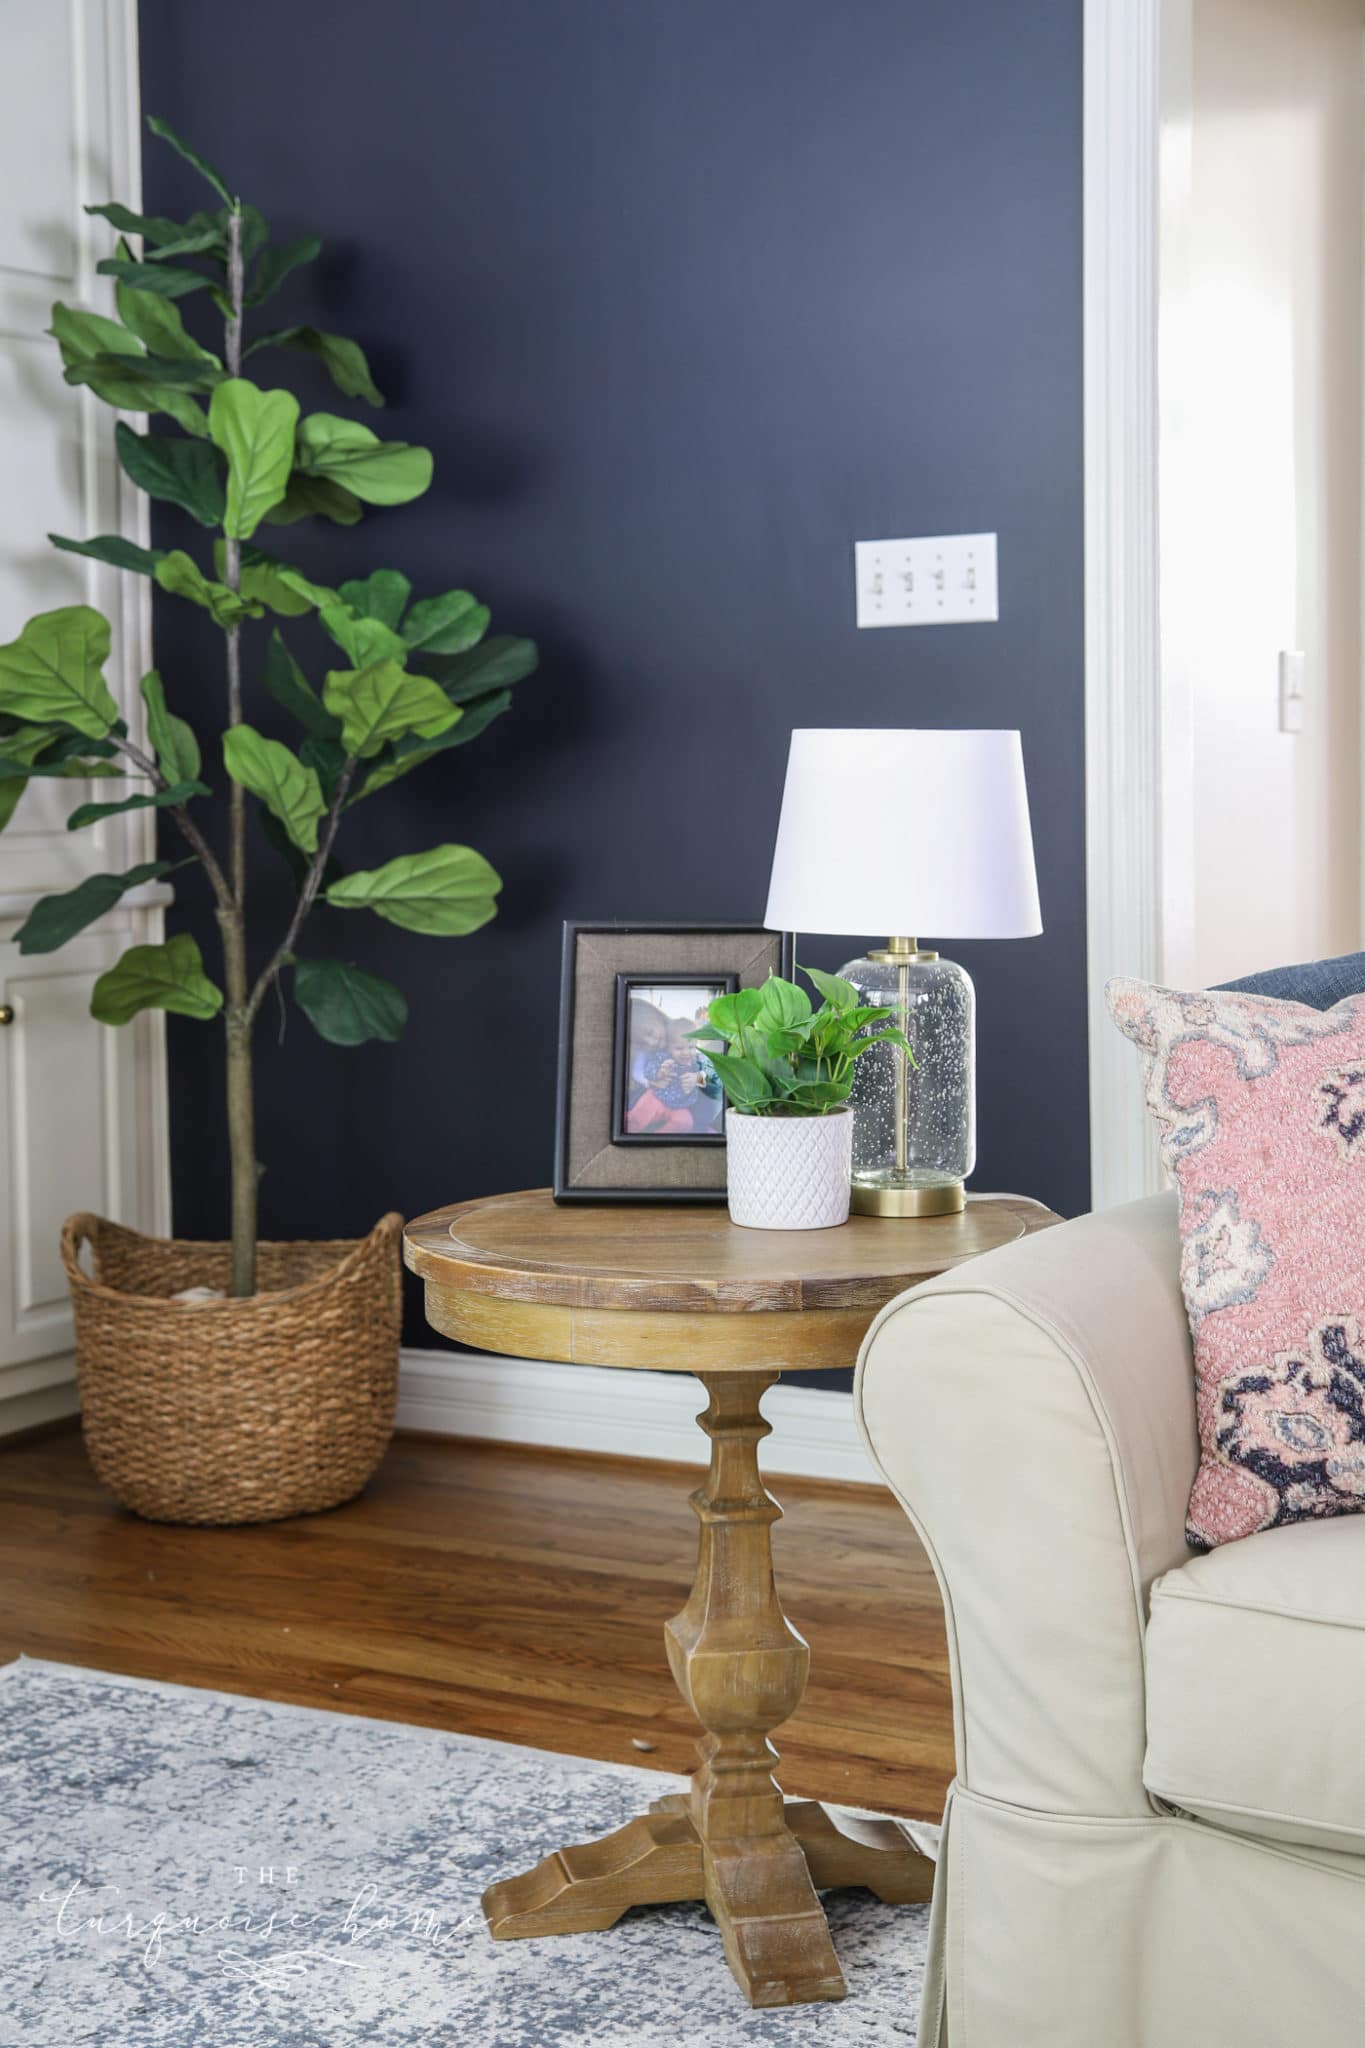 Home Decor 101: How to Decorate End Tables